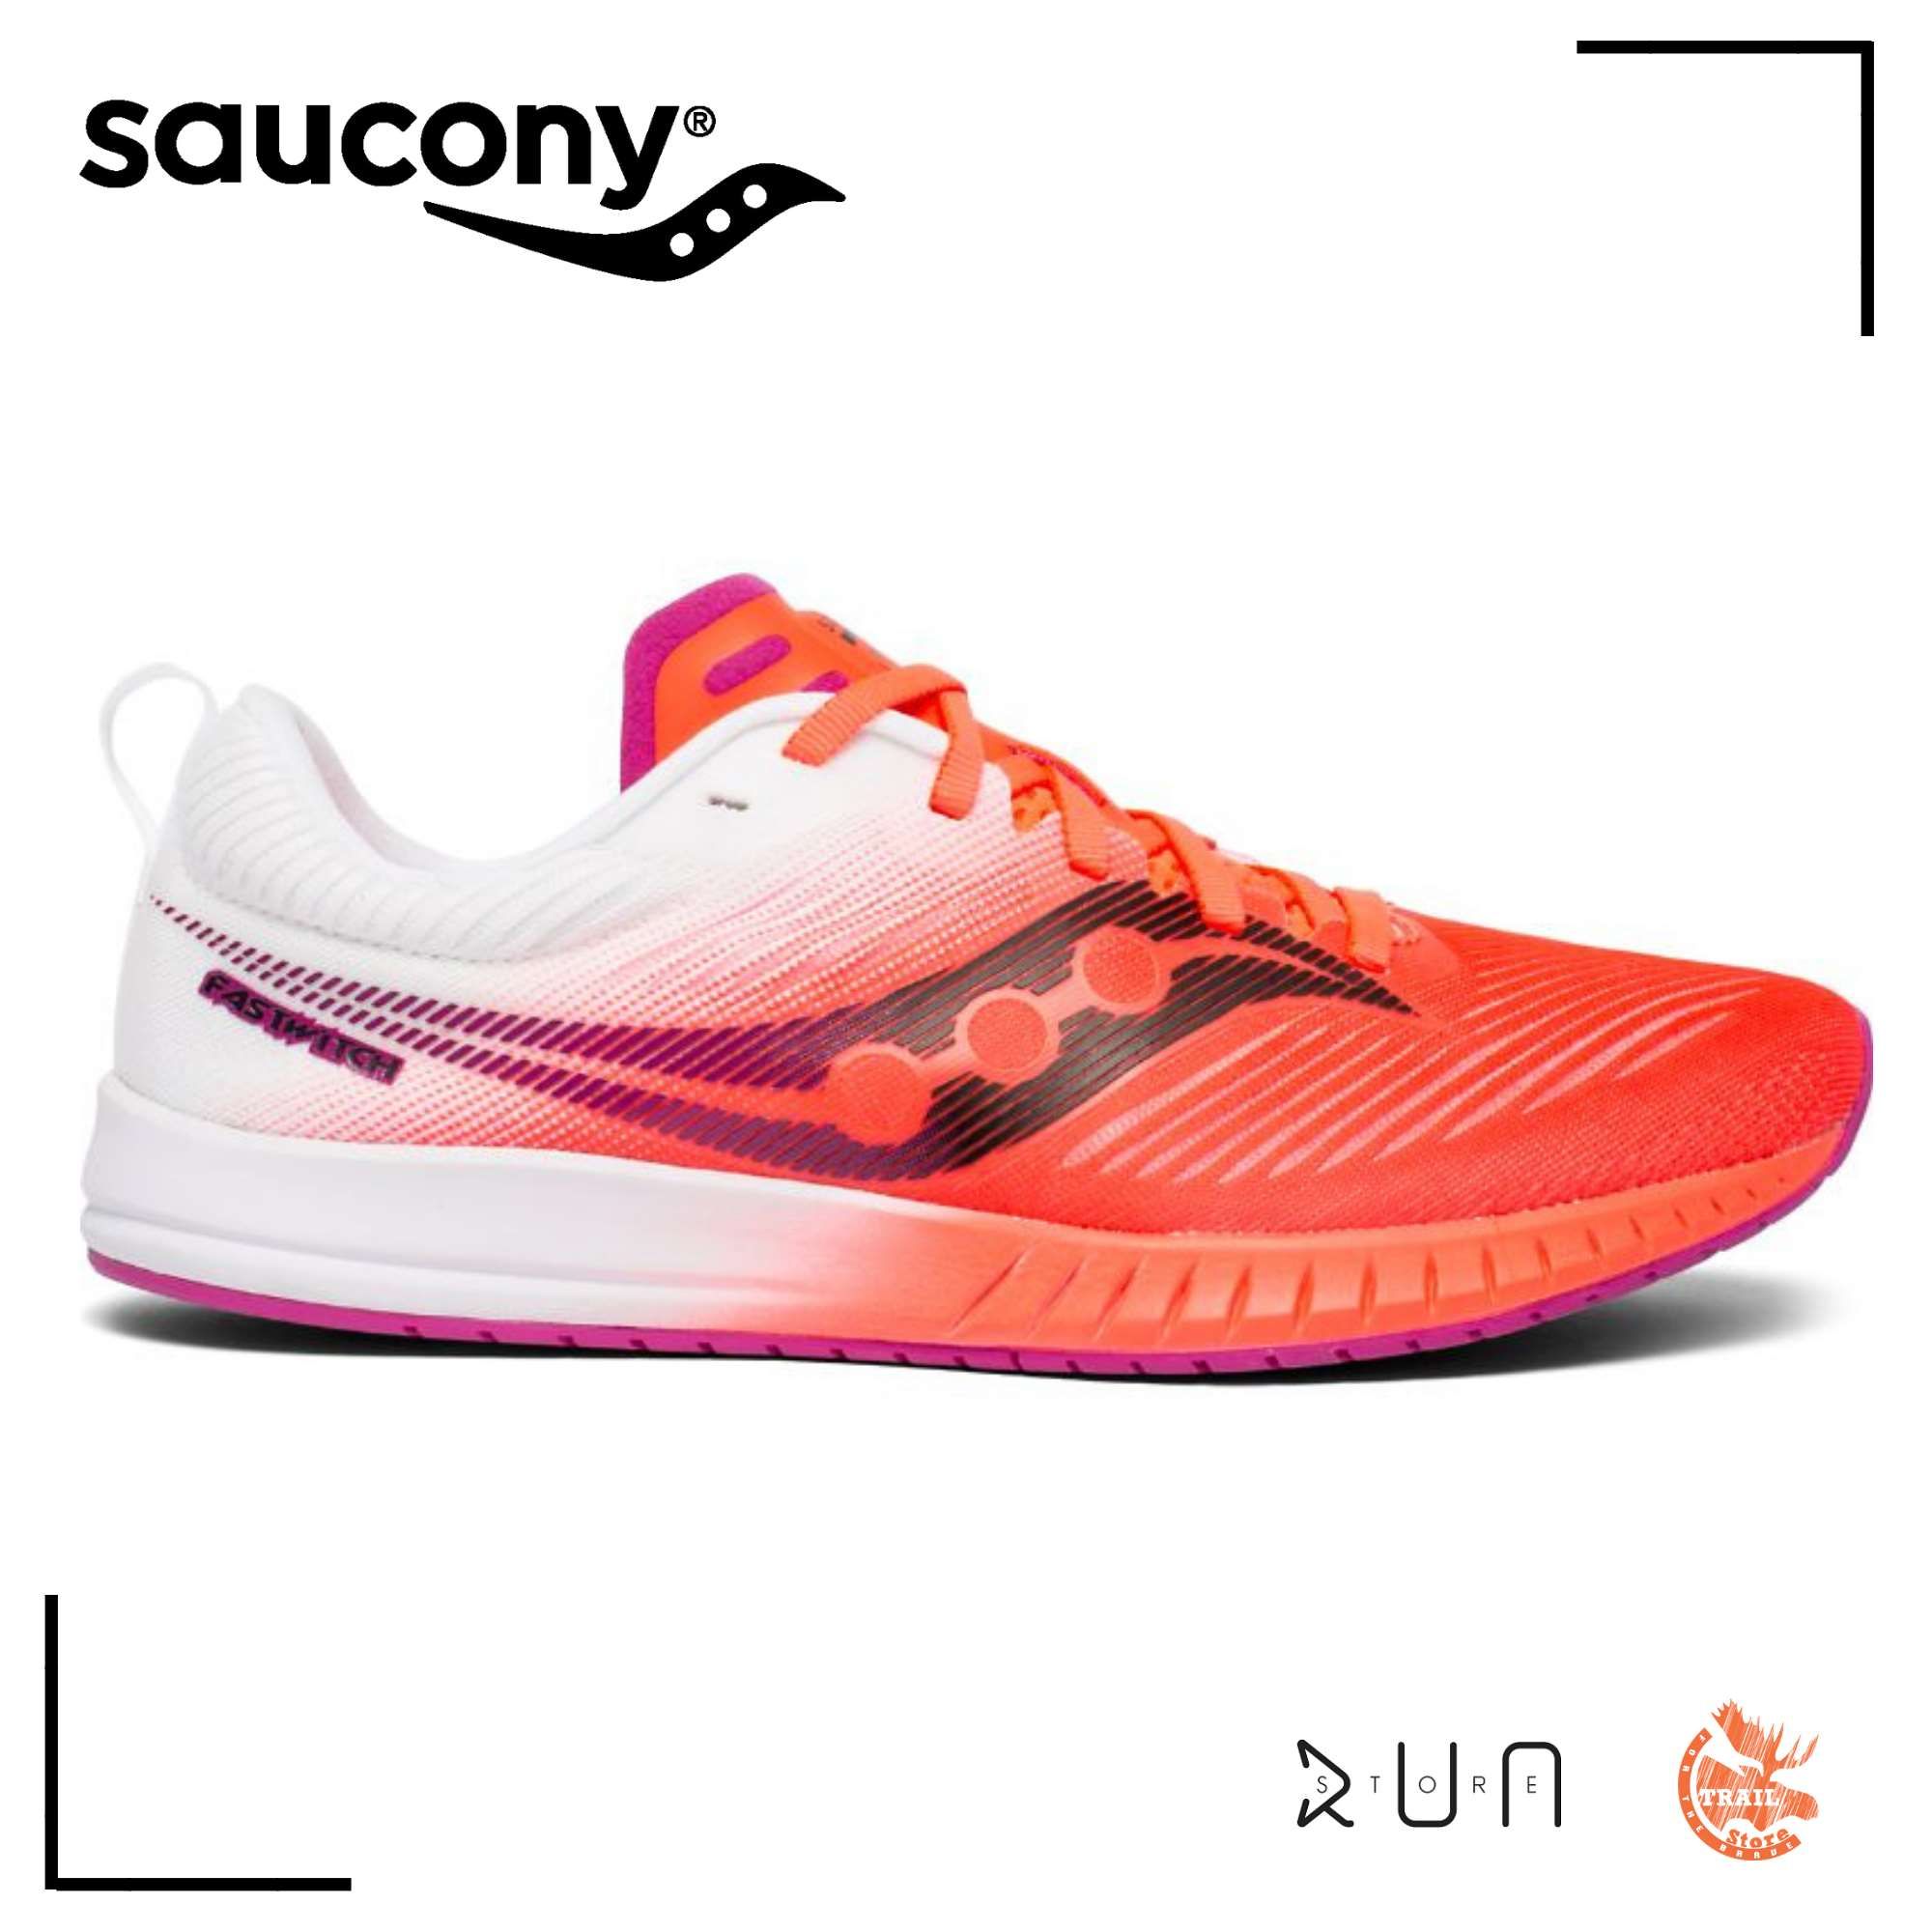 saucony fastwitch 8 homme or